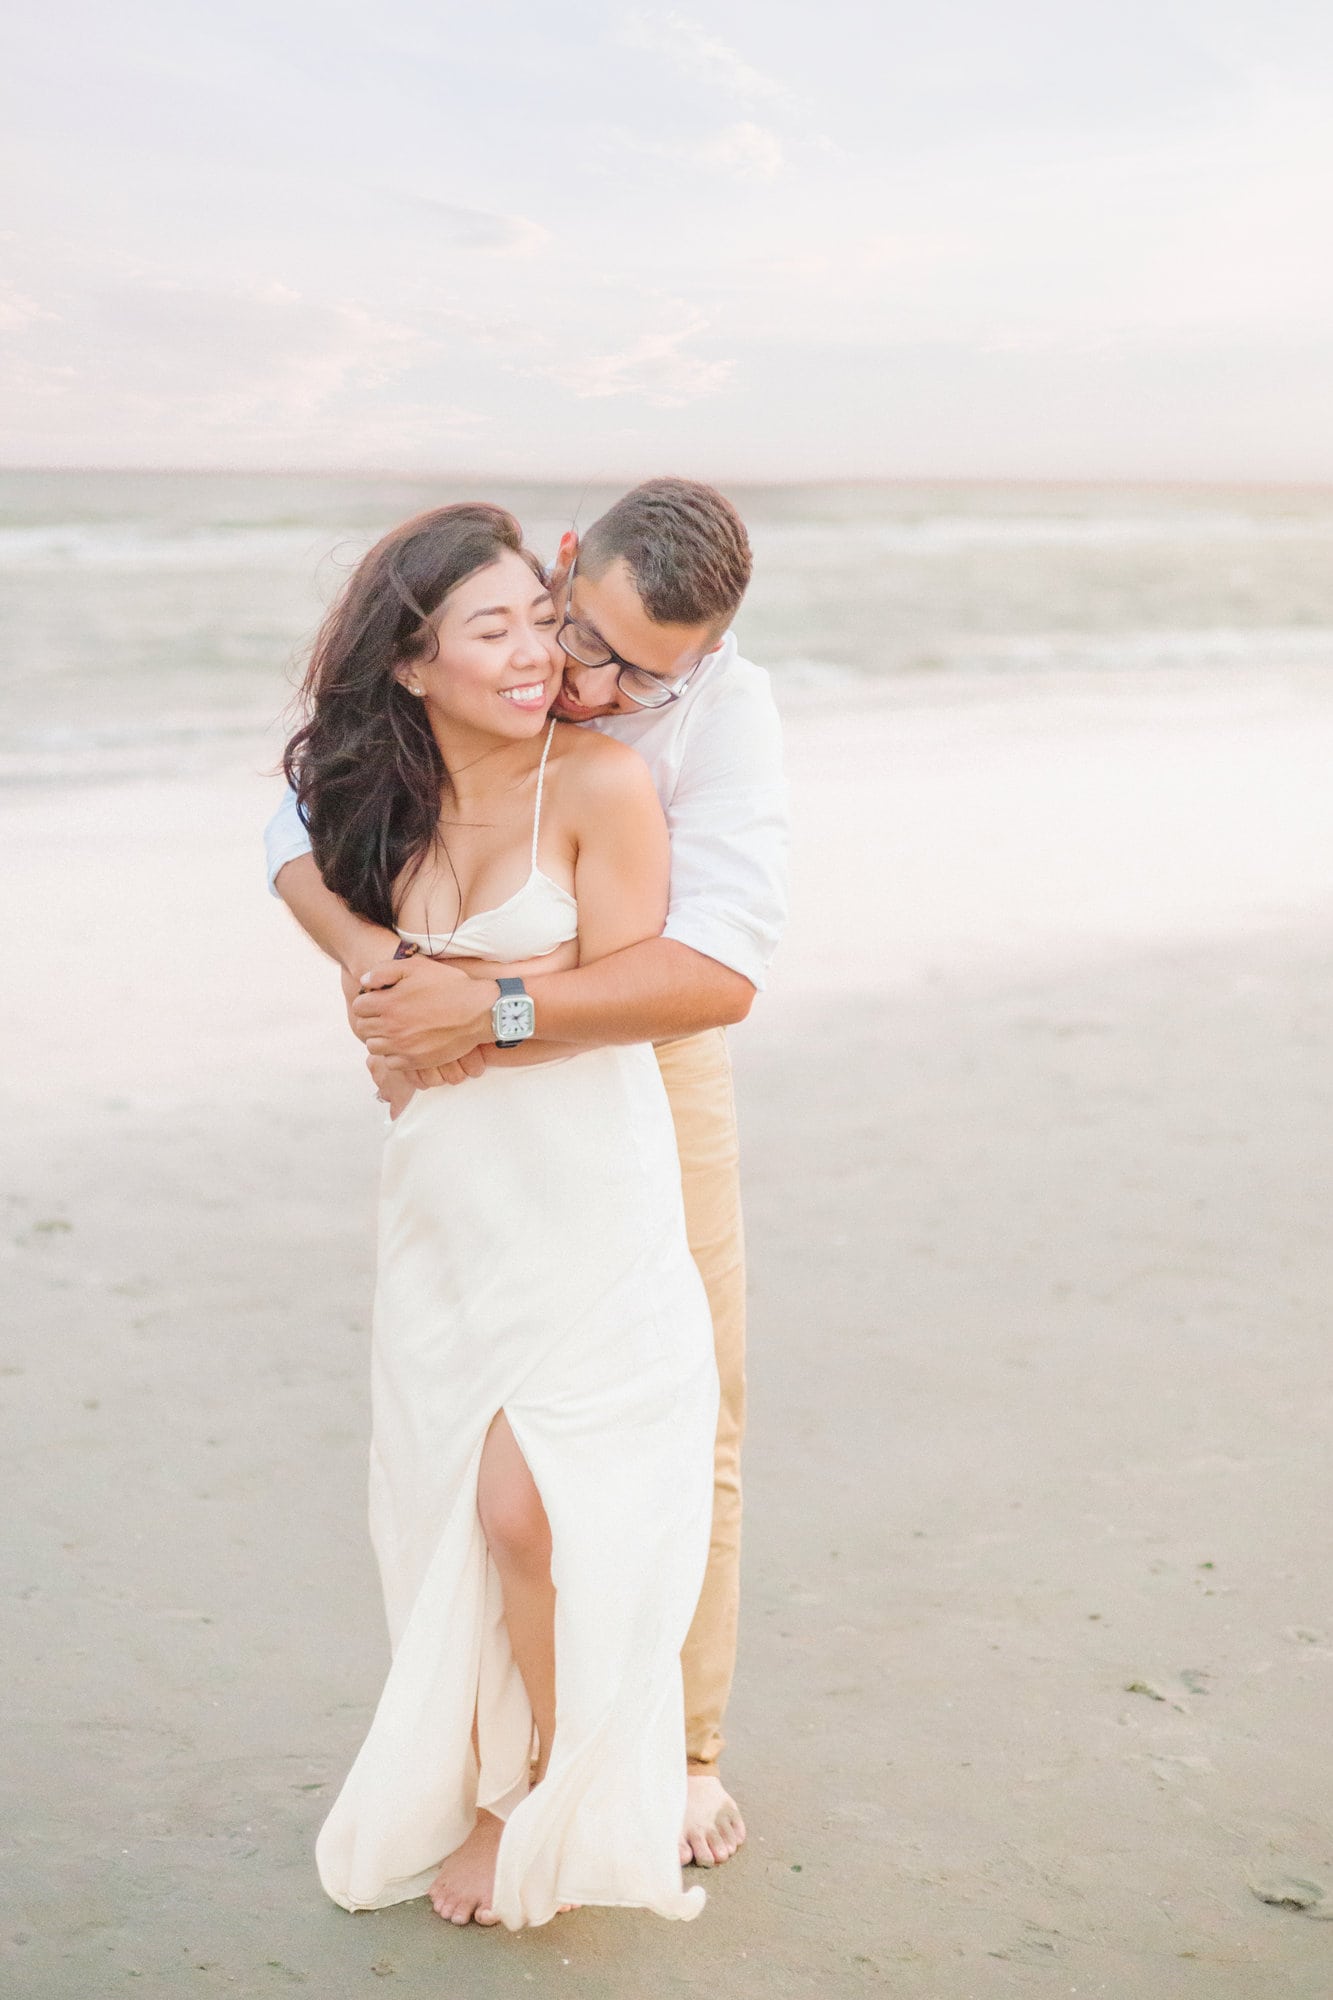 Engagement pictures on the beach wearing a white dress, a white shirt, and khaki pants.